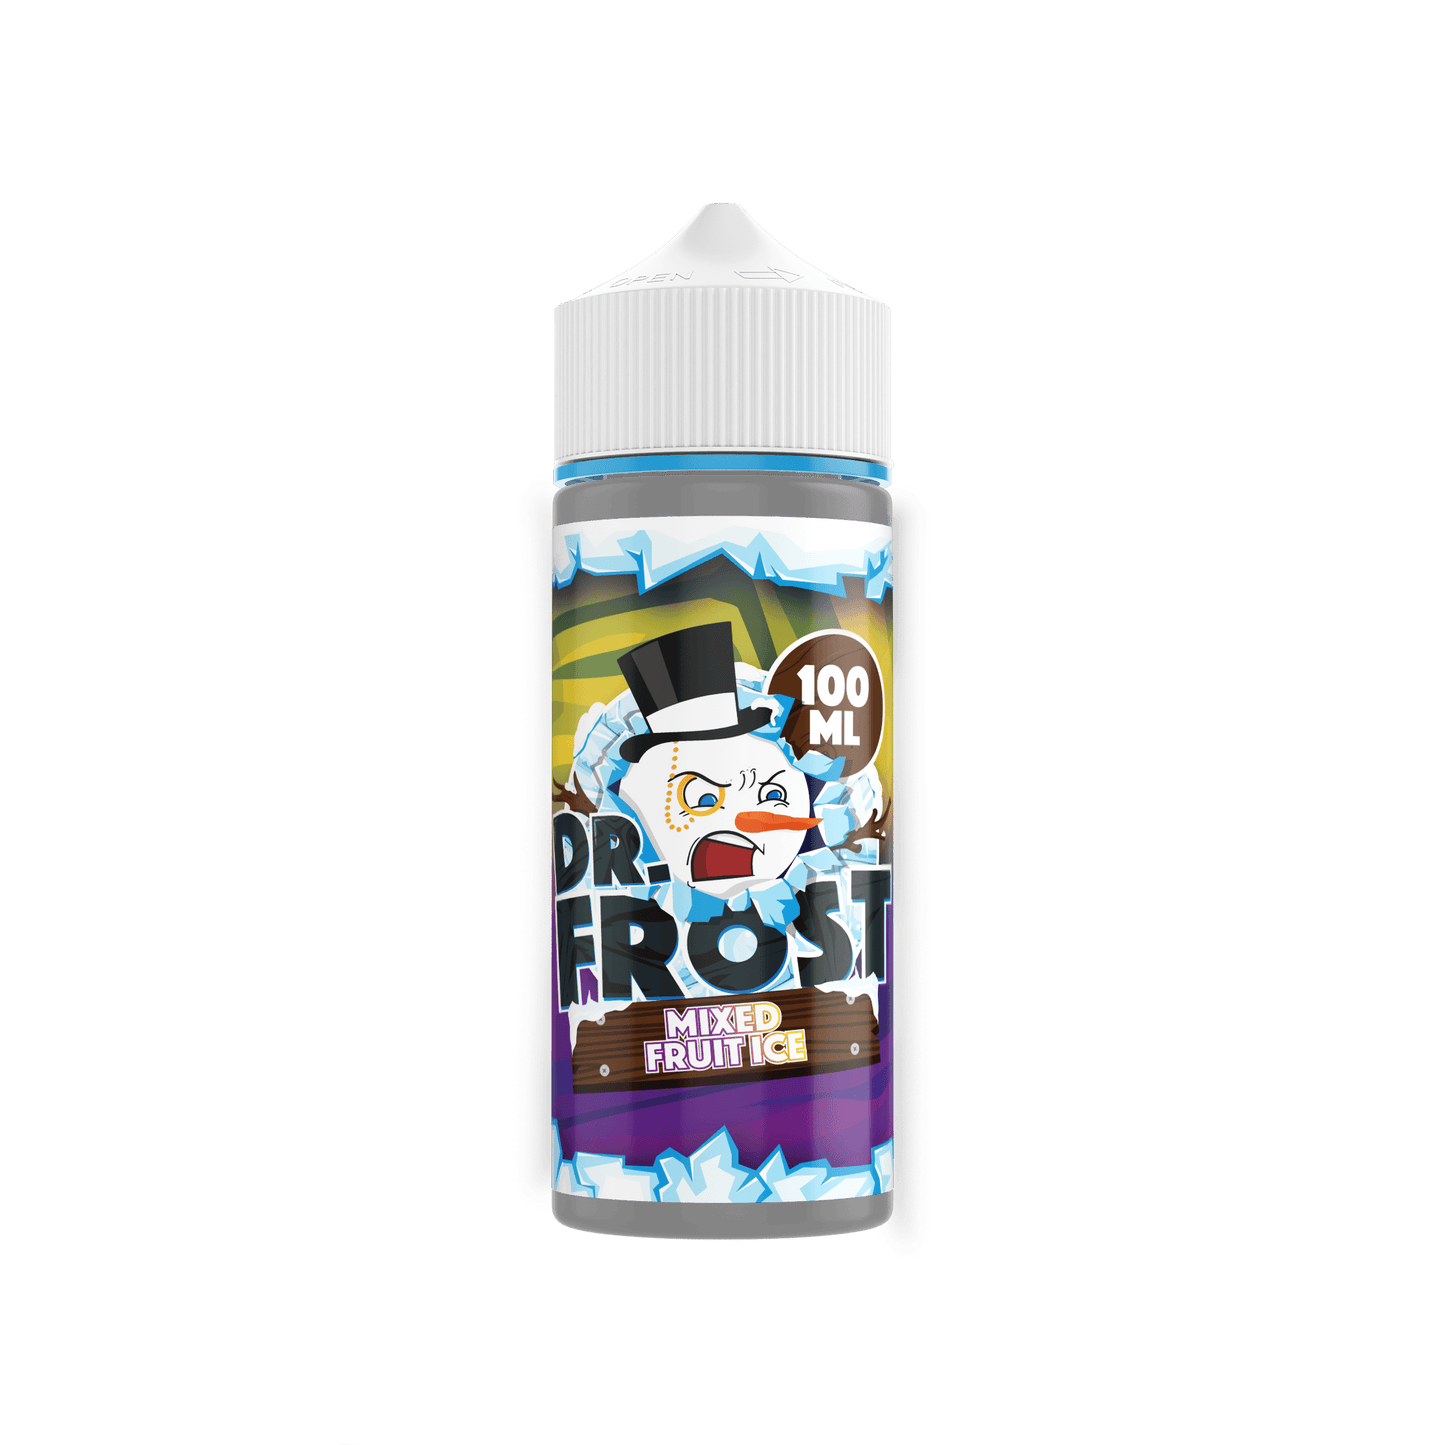 Dr.Frost - Mixed Fruit Ice 100ml - Vaper Aid